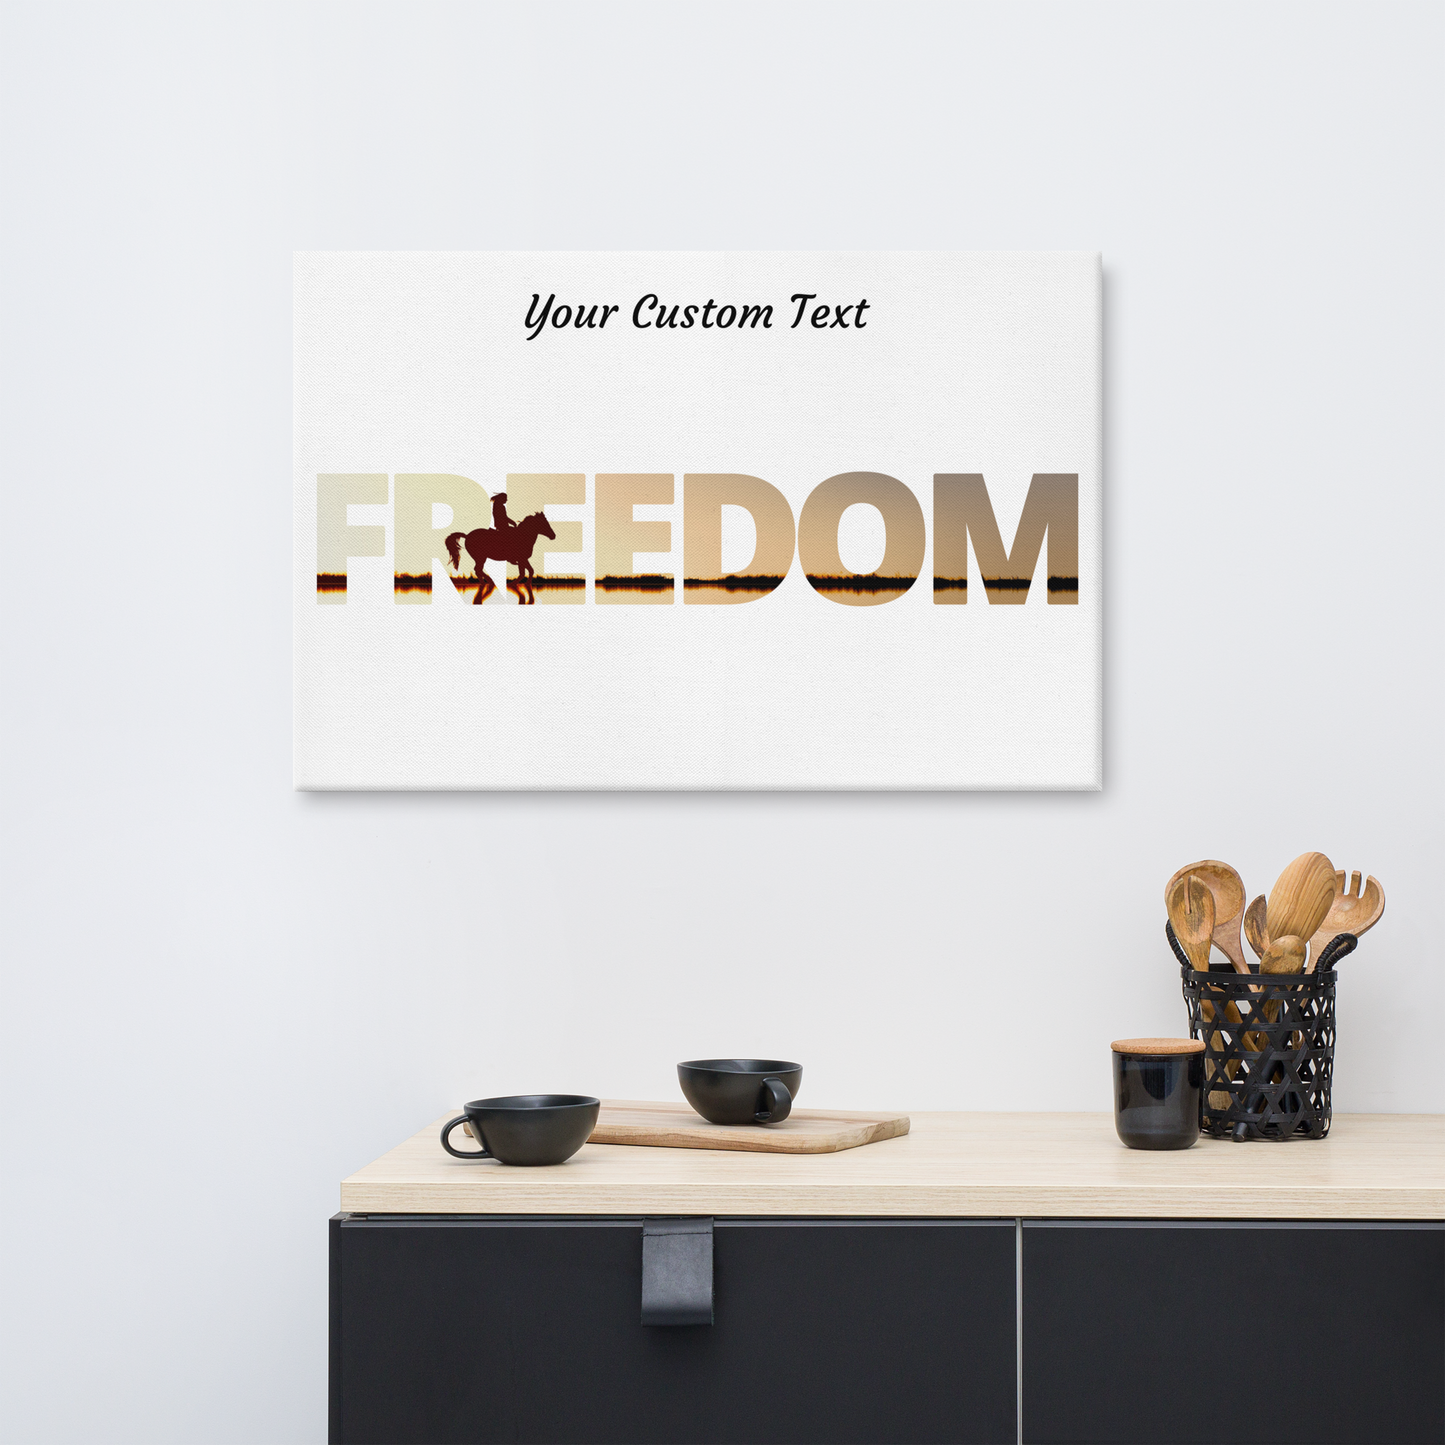 Hand Drawn Horse || Wall Art Canvas - Design: "Freedom"; Static Design; Personalizable Text